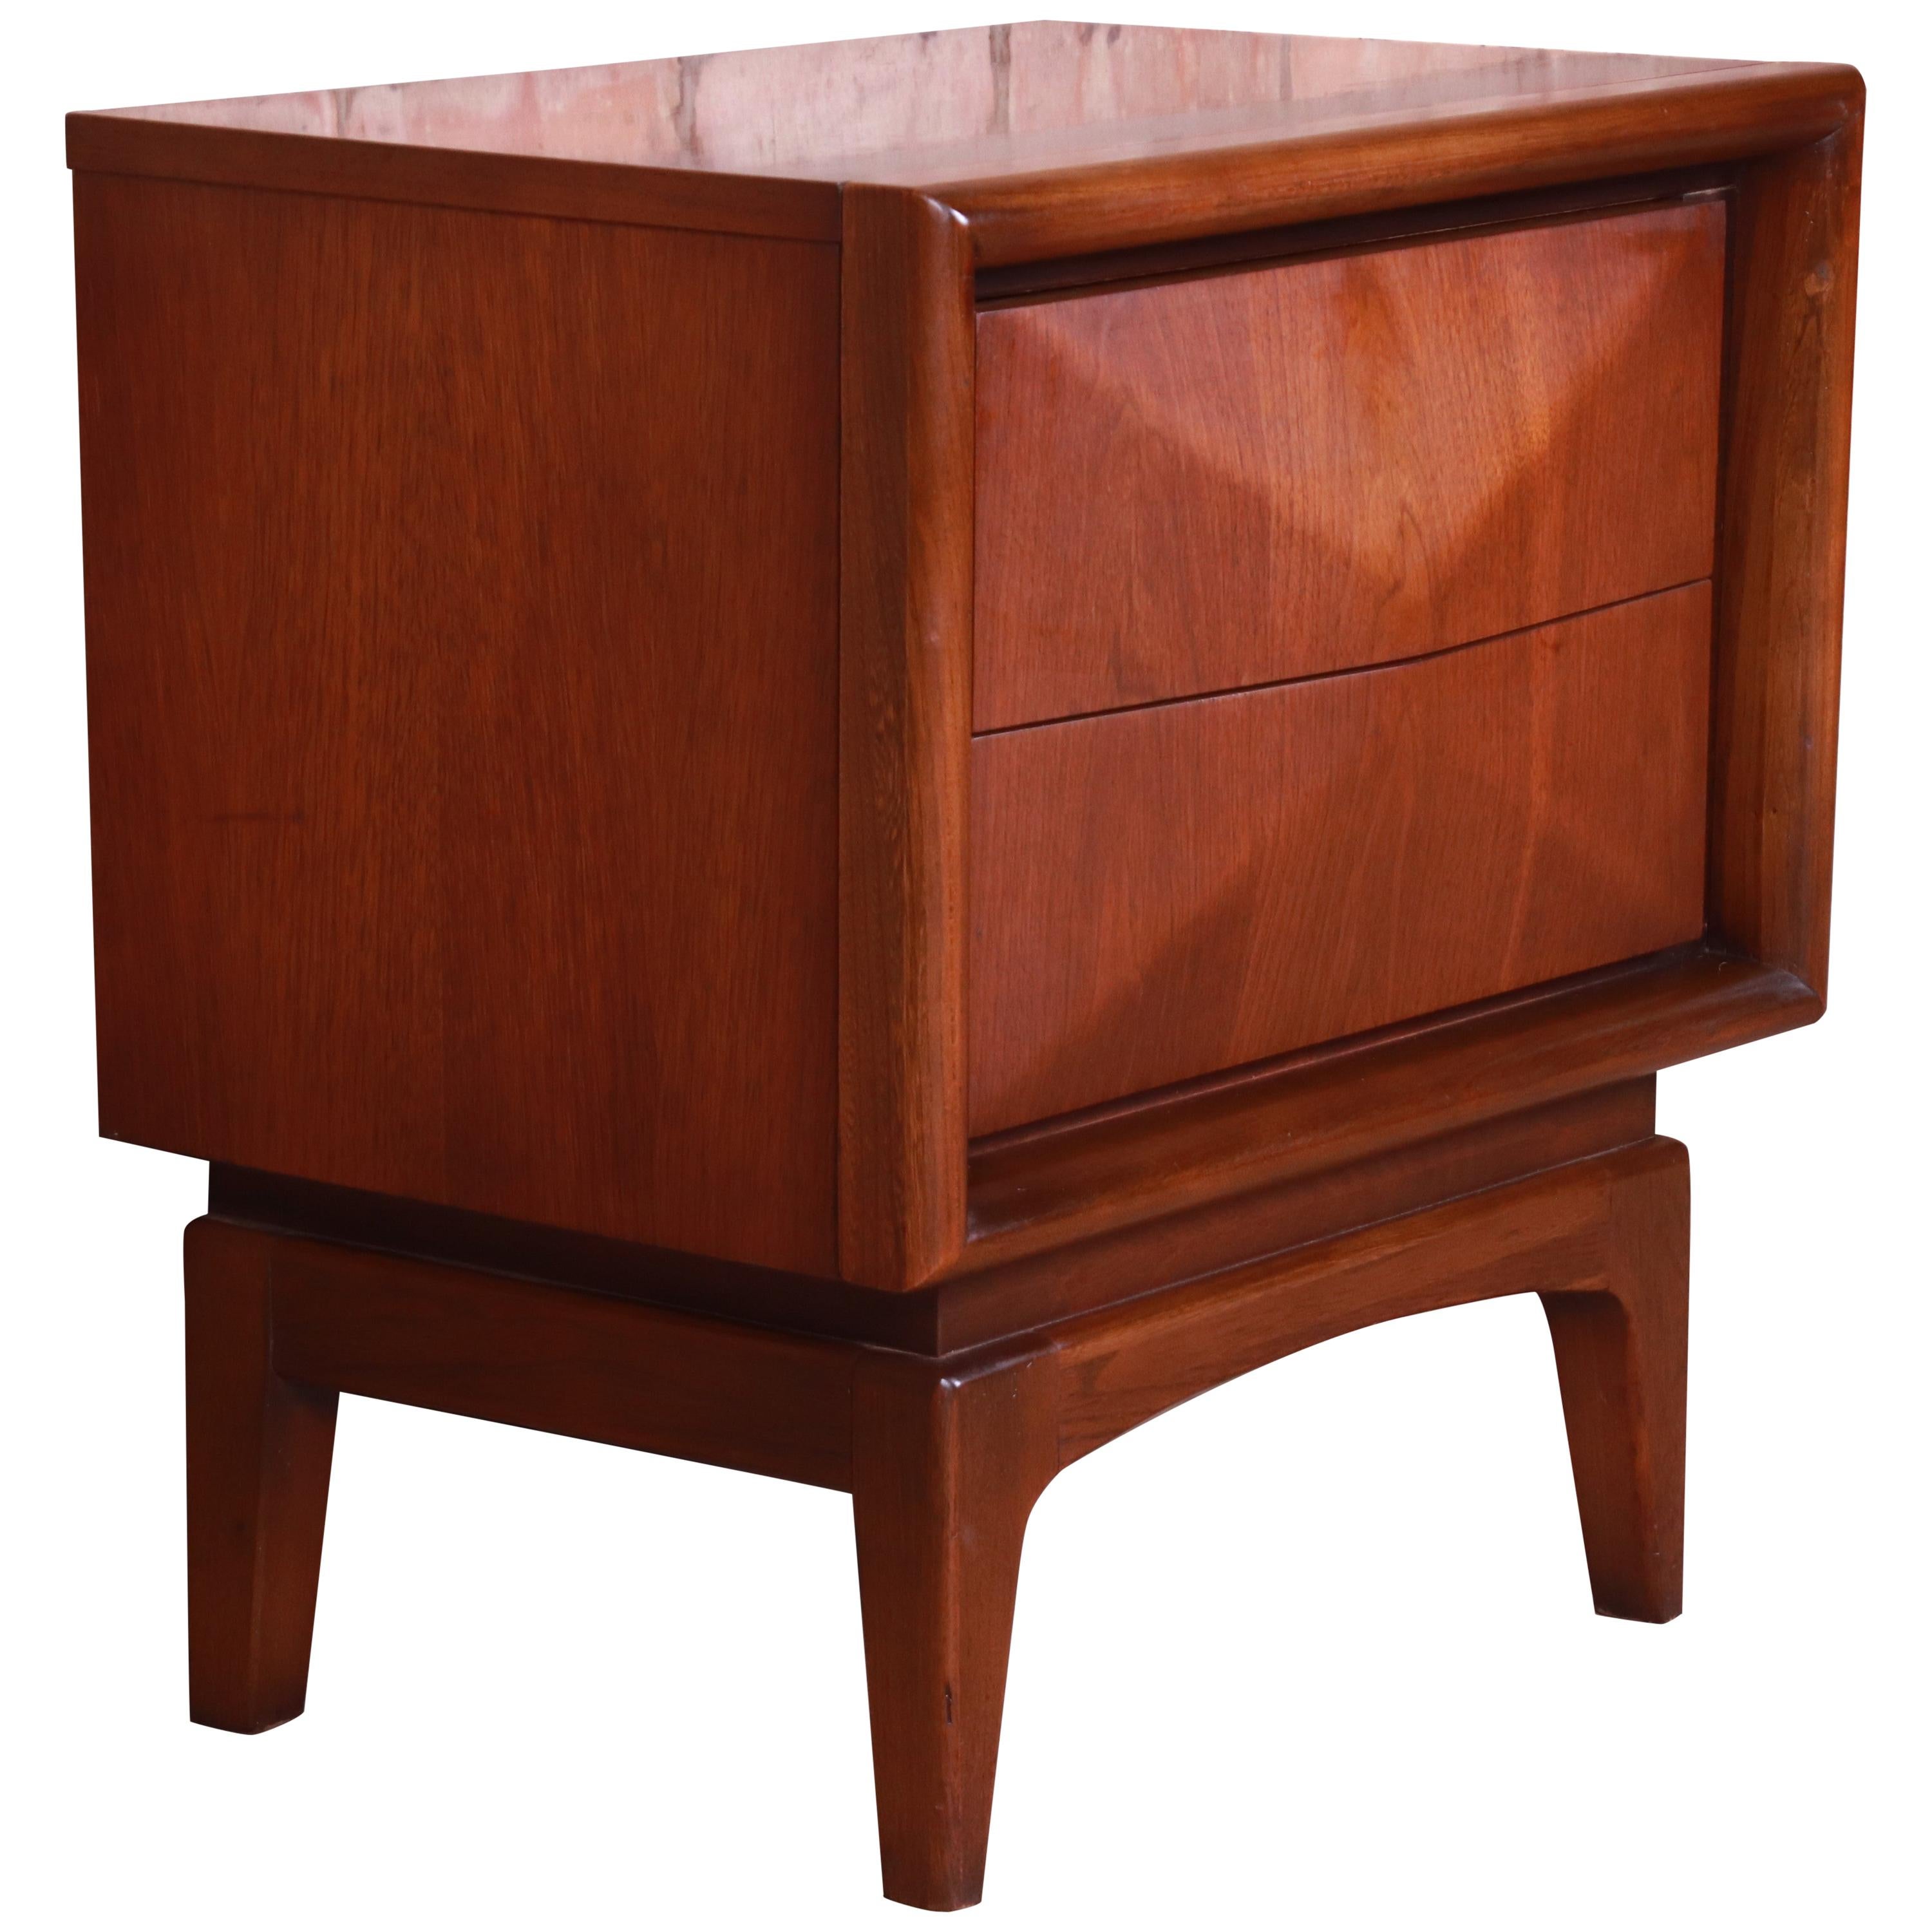 Mid-Century Modern Sculpted Walnut Diamond Front Nightstand by United, 1960s